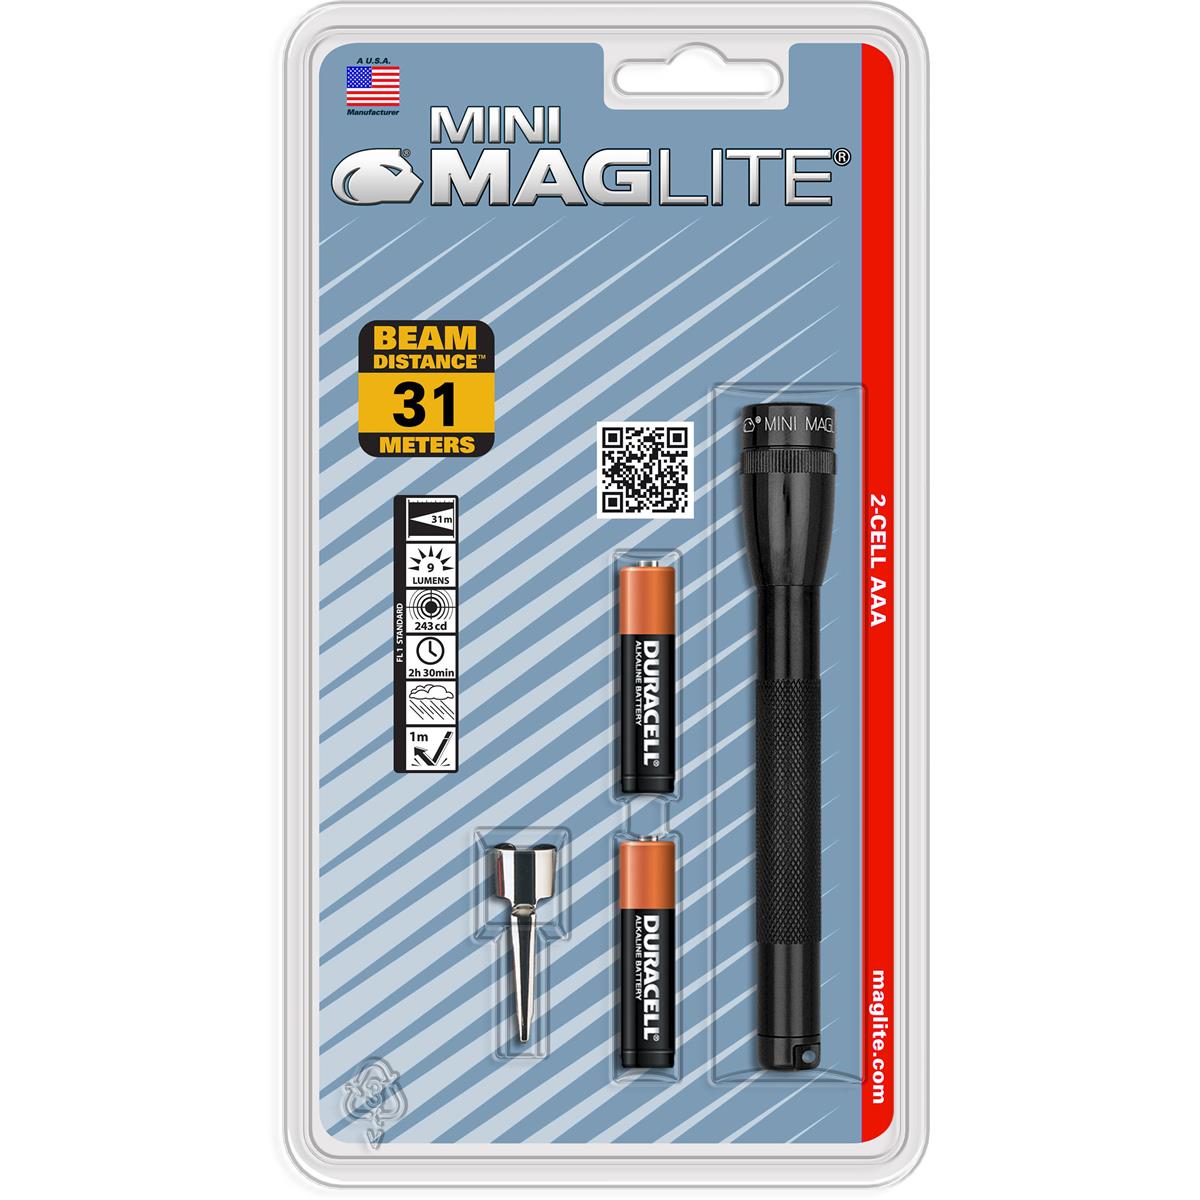 Image of MagLite Maglite Mini 2-Cell AAA Flashlight with Clip